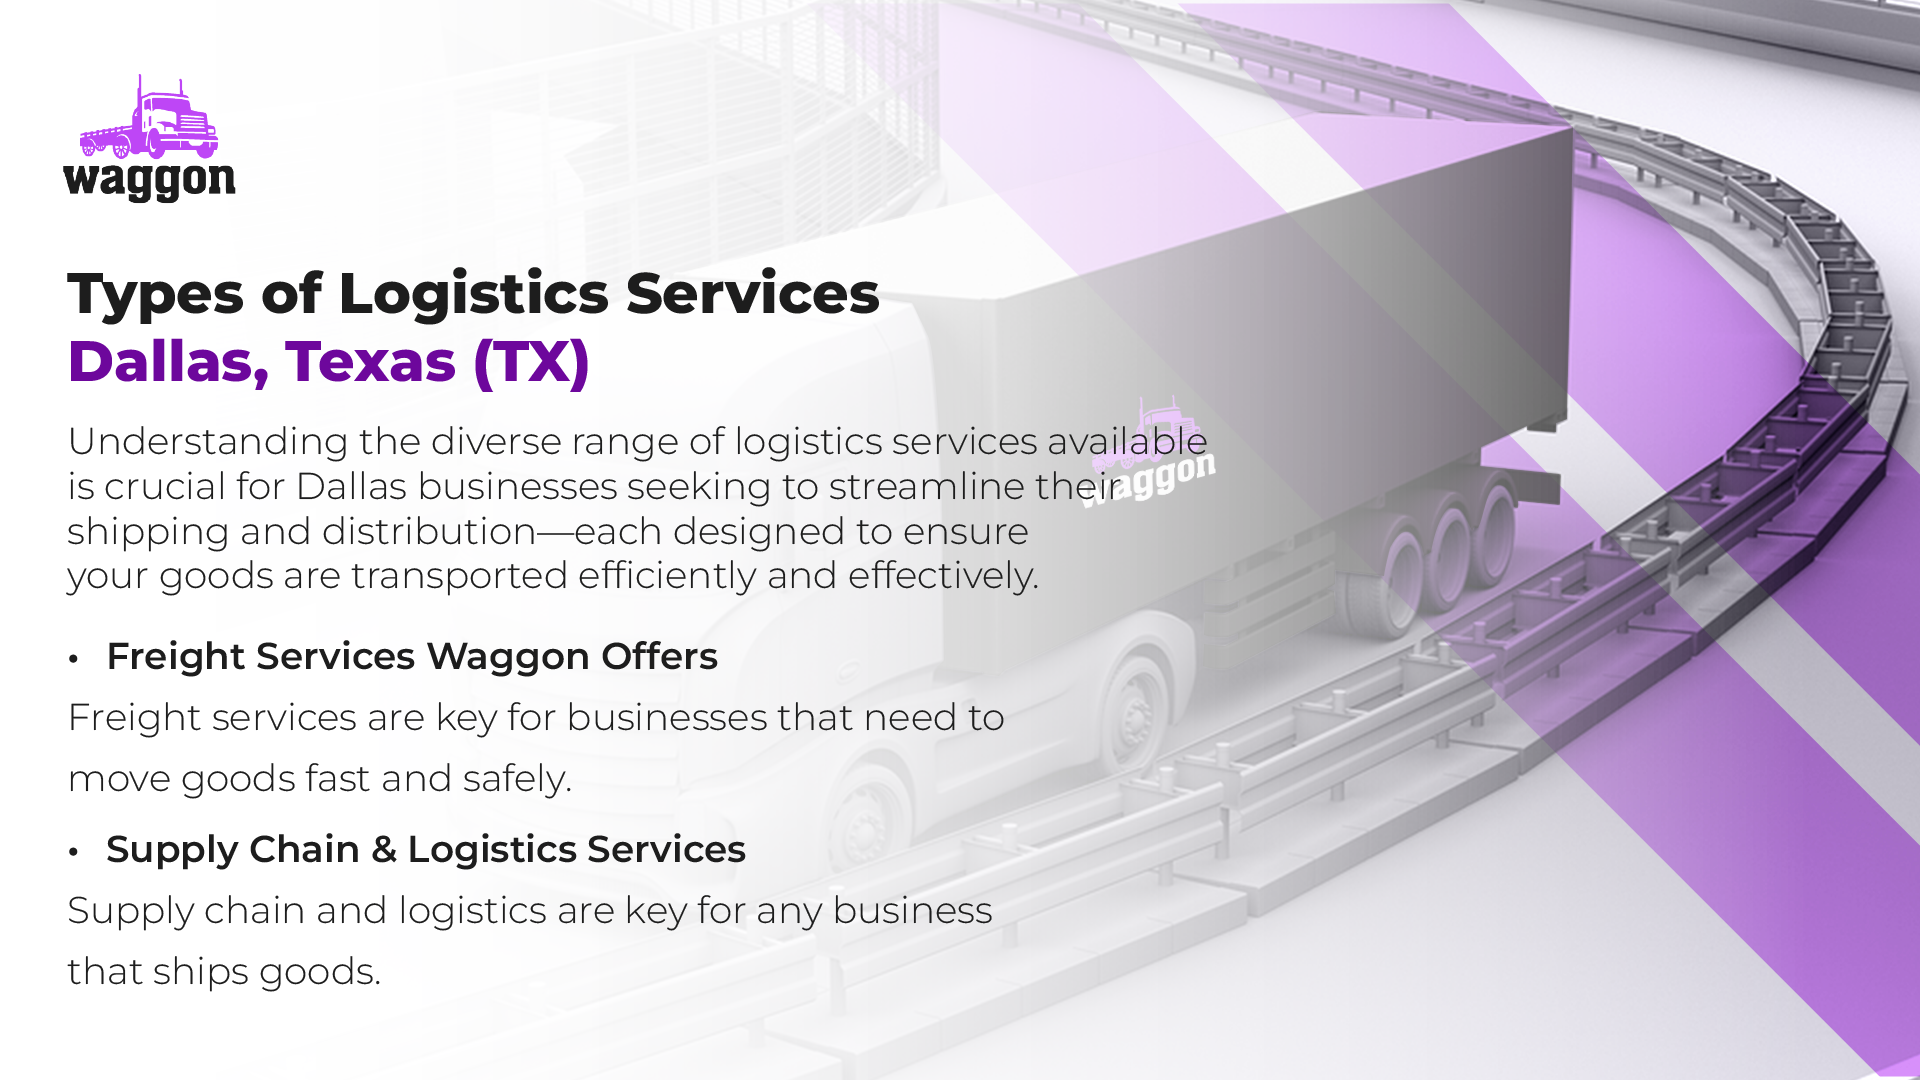 Types of Logistics Services in Dallas, Texas (TX)